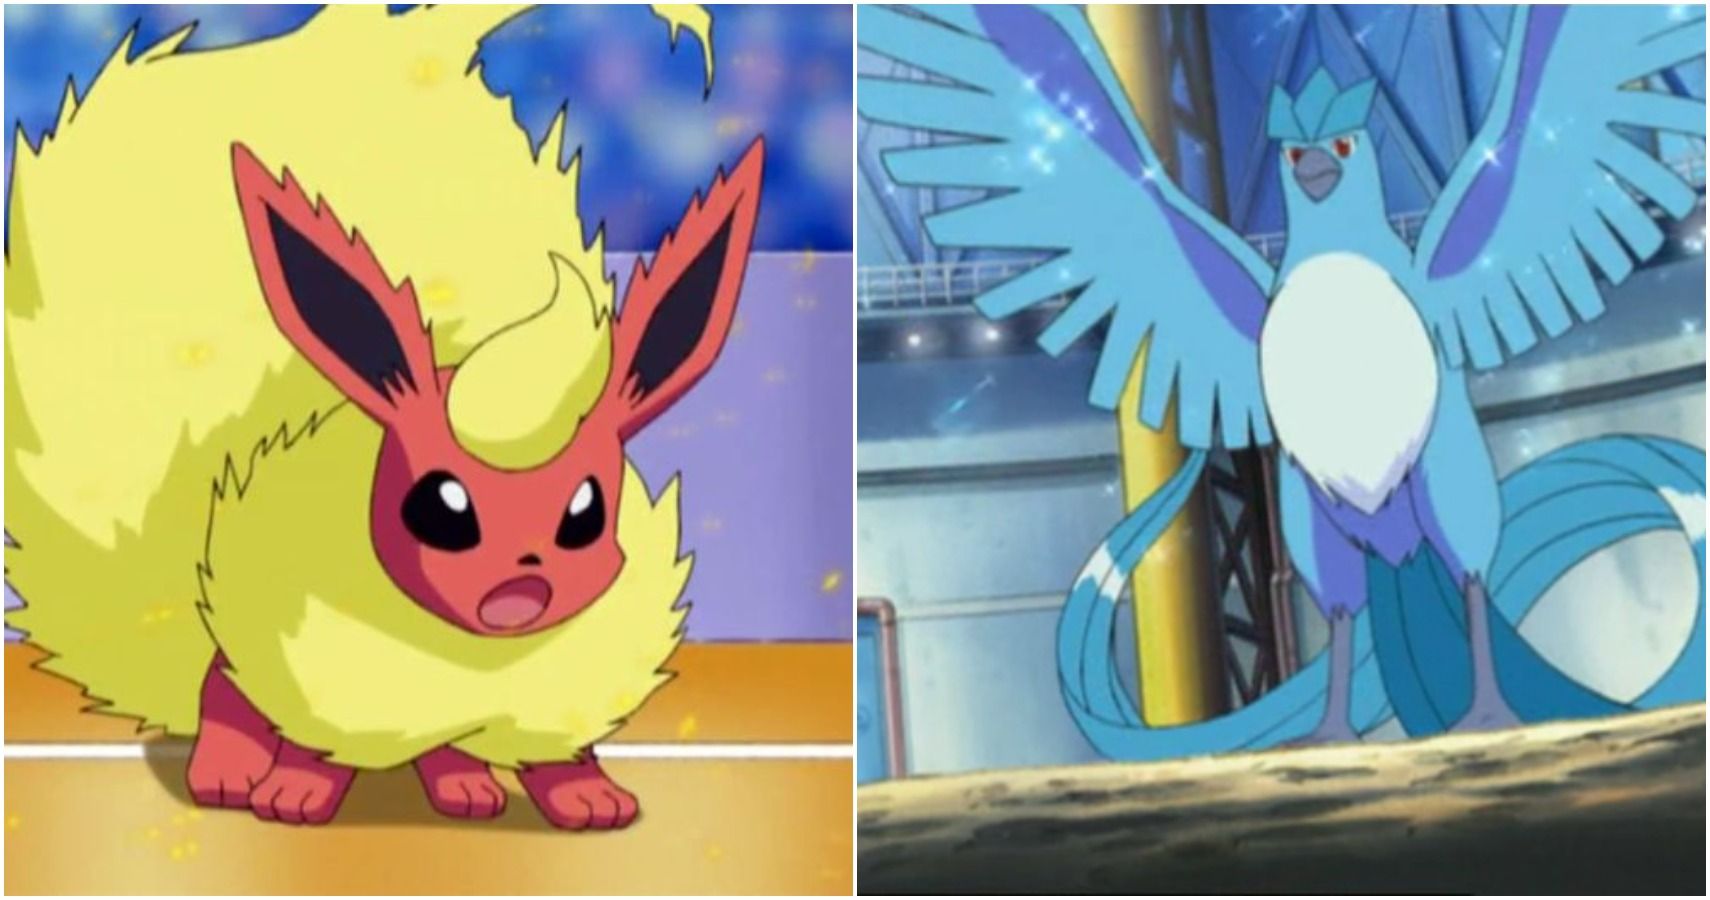 Flareon and Articuno from the Pokemon Anime